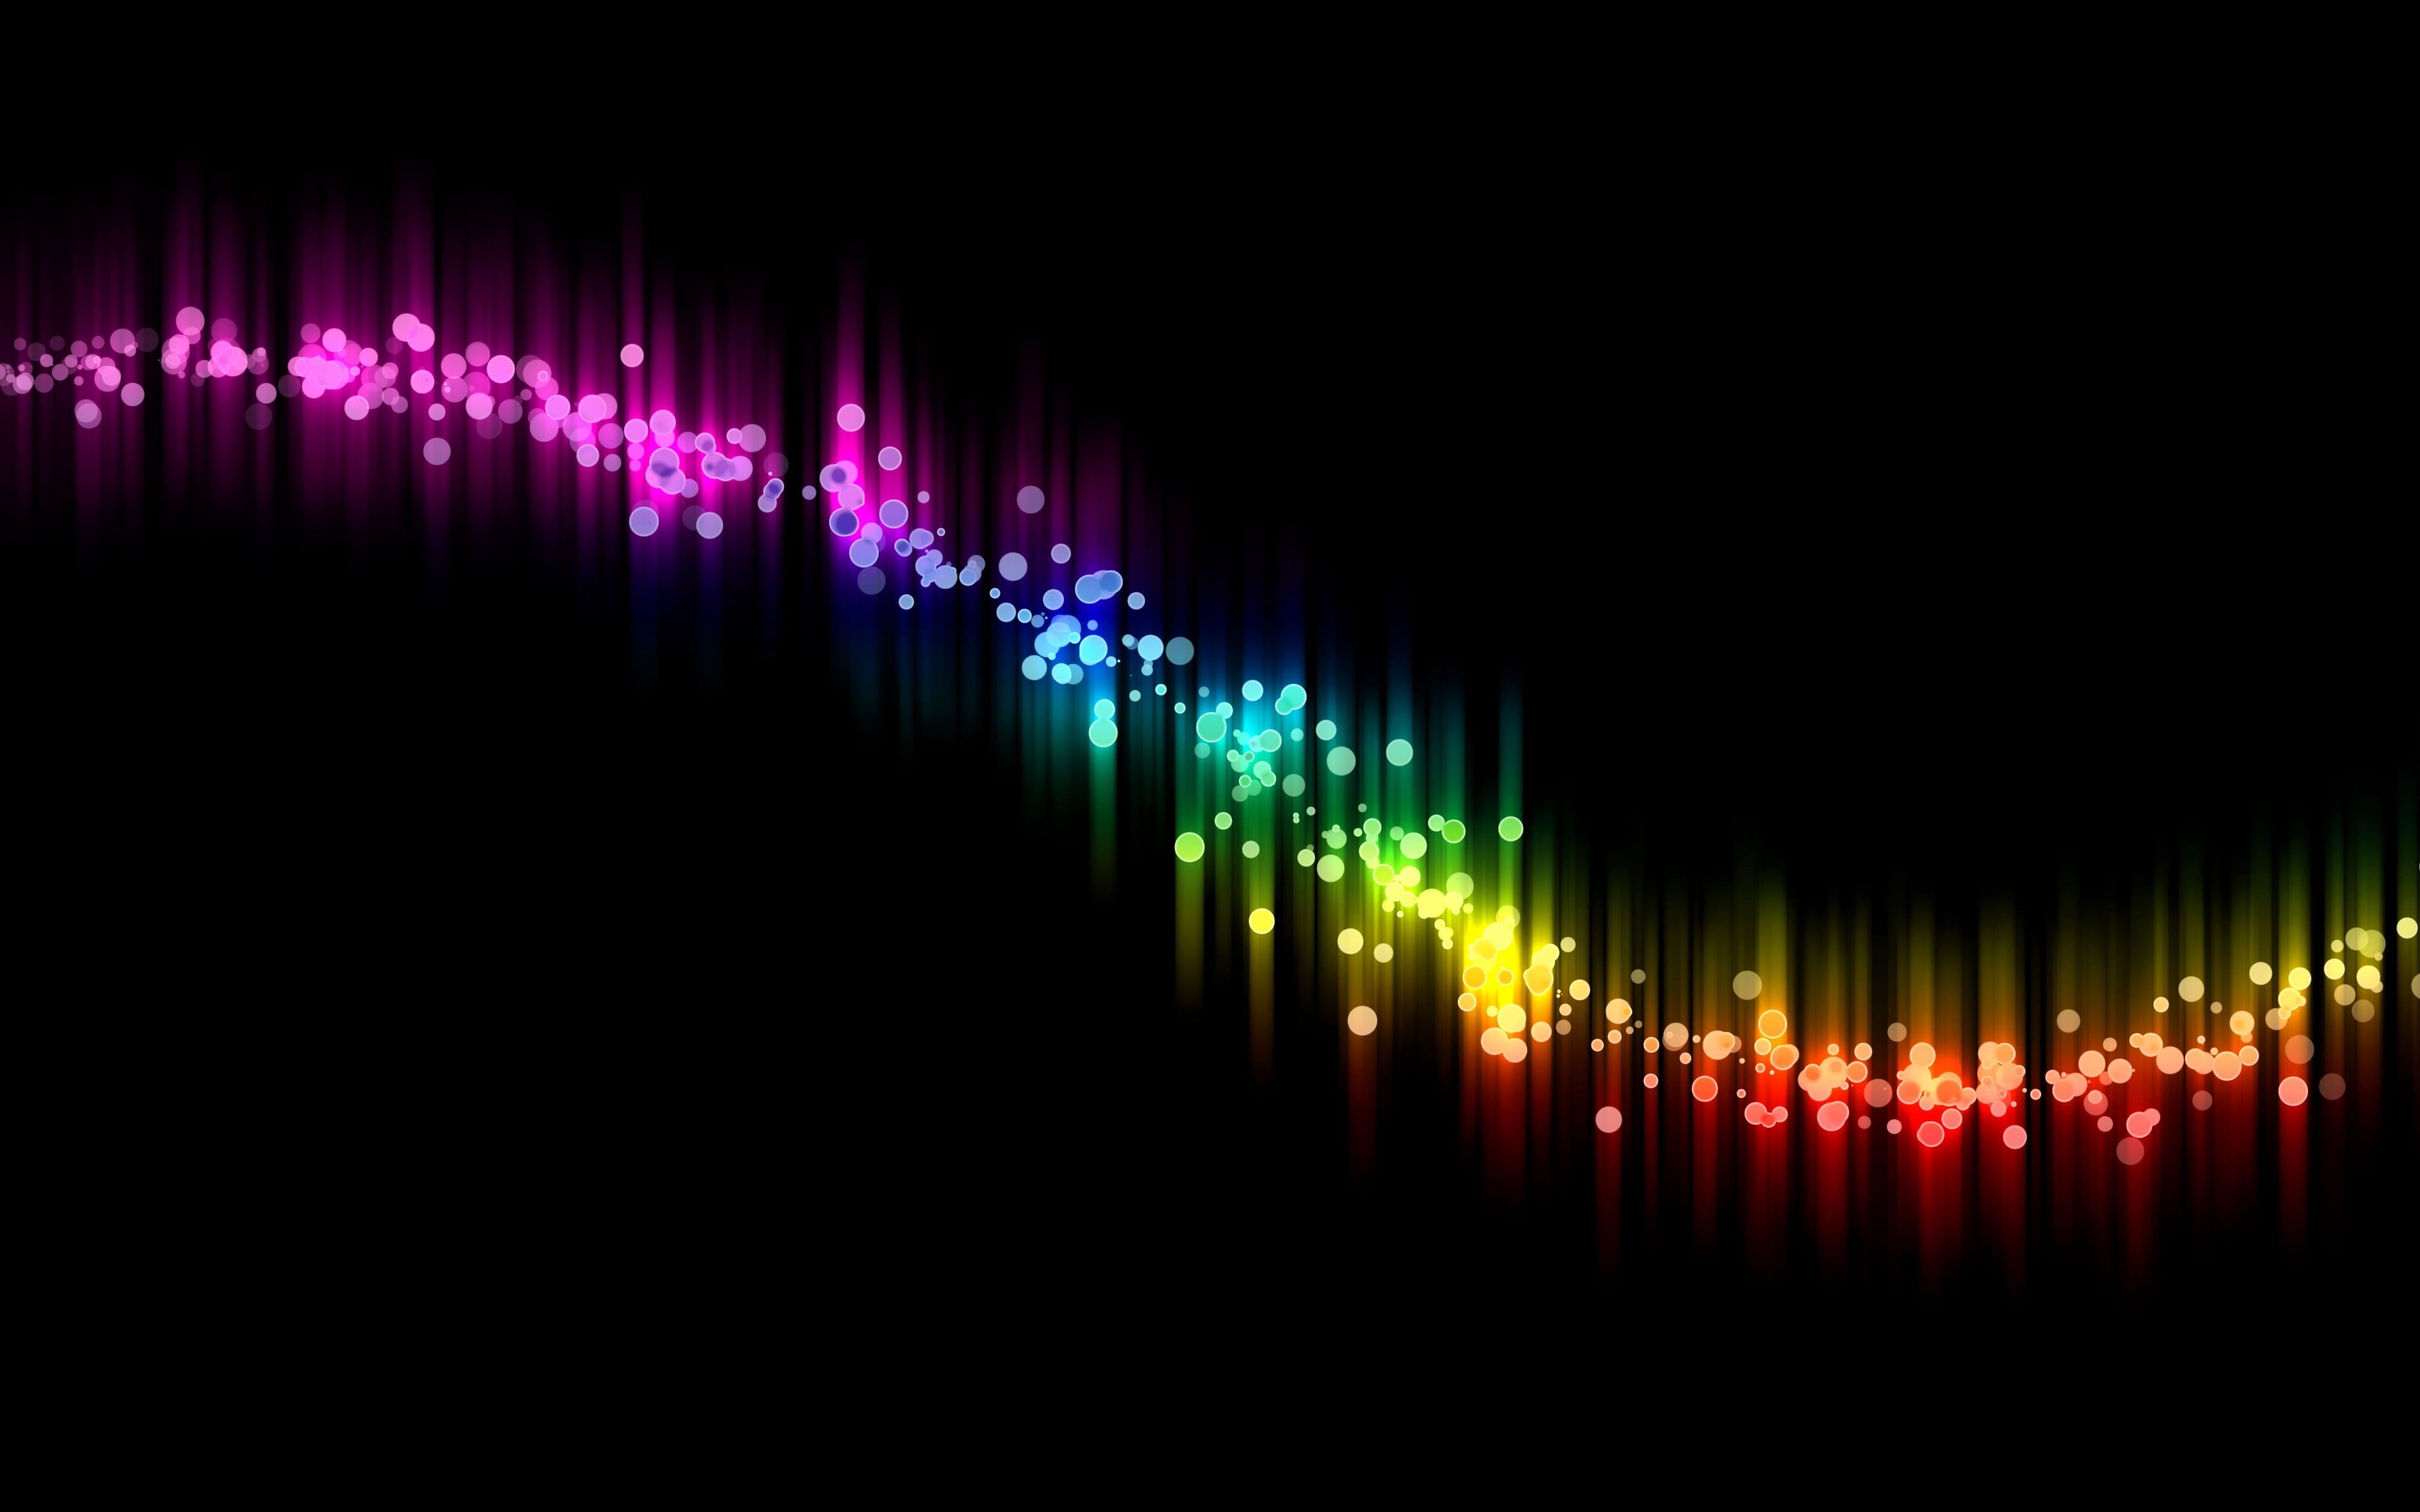 multicolored rainbow #abstract #black #colorful #curve K #wallpaper #hdwallpaper #desktop. Abstract wallpaper, Abstract, Rainbow abstract